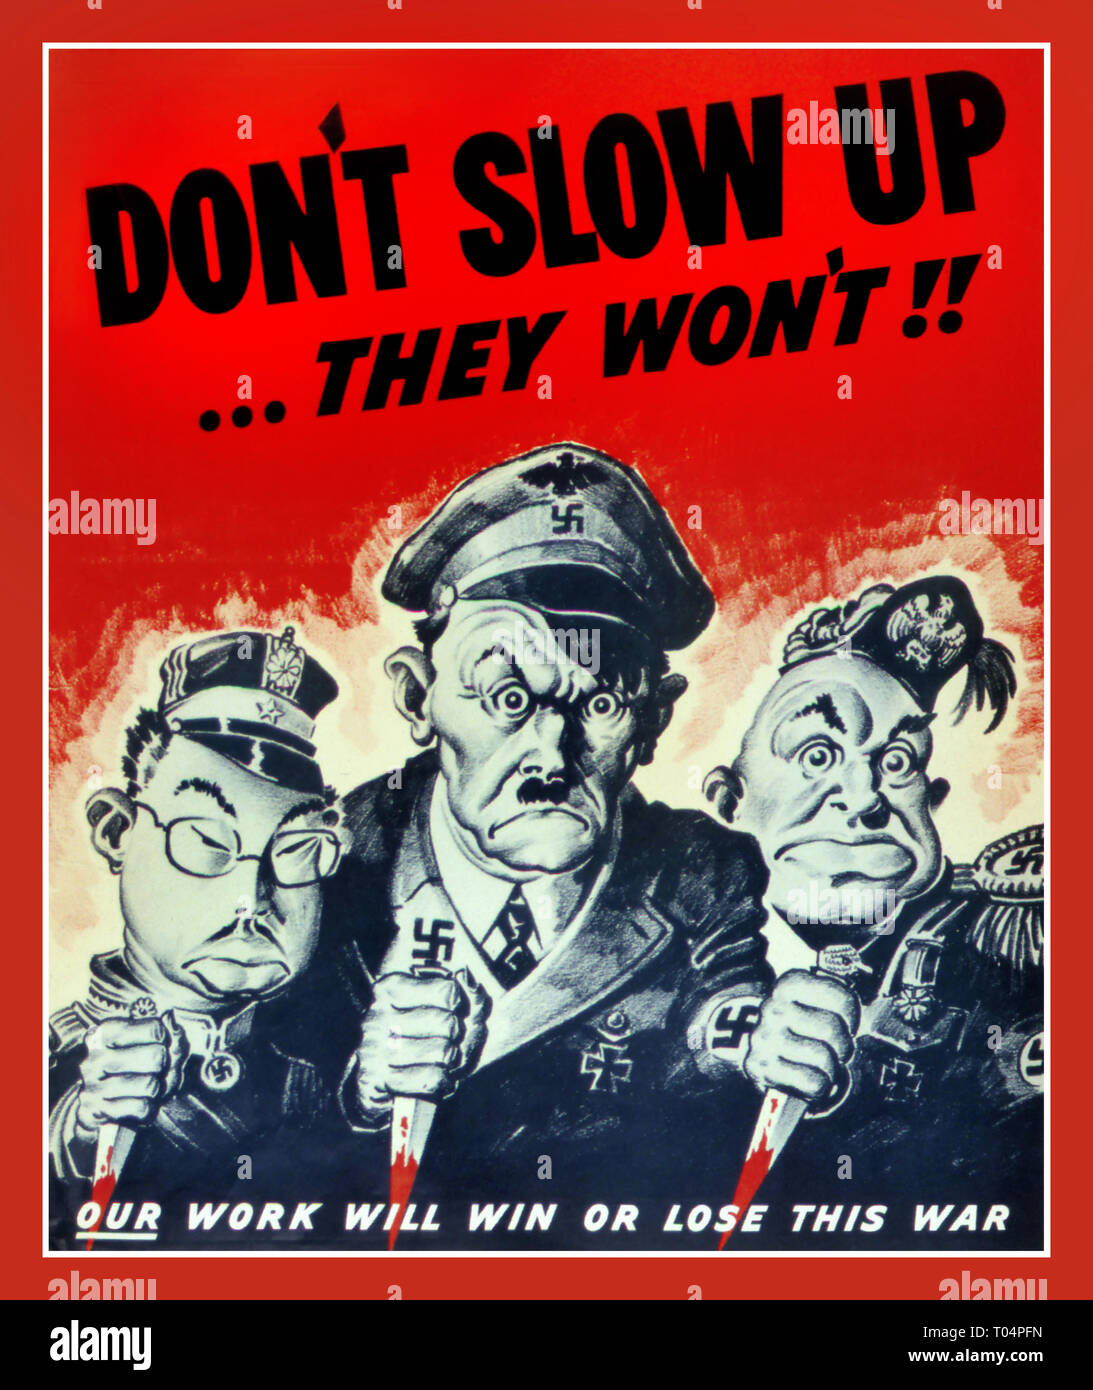 WW2 American Propaganda Poster feauturing Hirohito, Hitler and Mussolini 'Don't Slow Up...They Won't!!' circa 1943 Axis Forces of evil Japan Germany and Italy Stock Photo